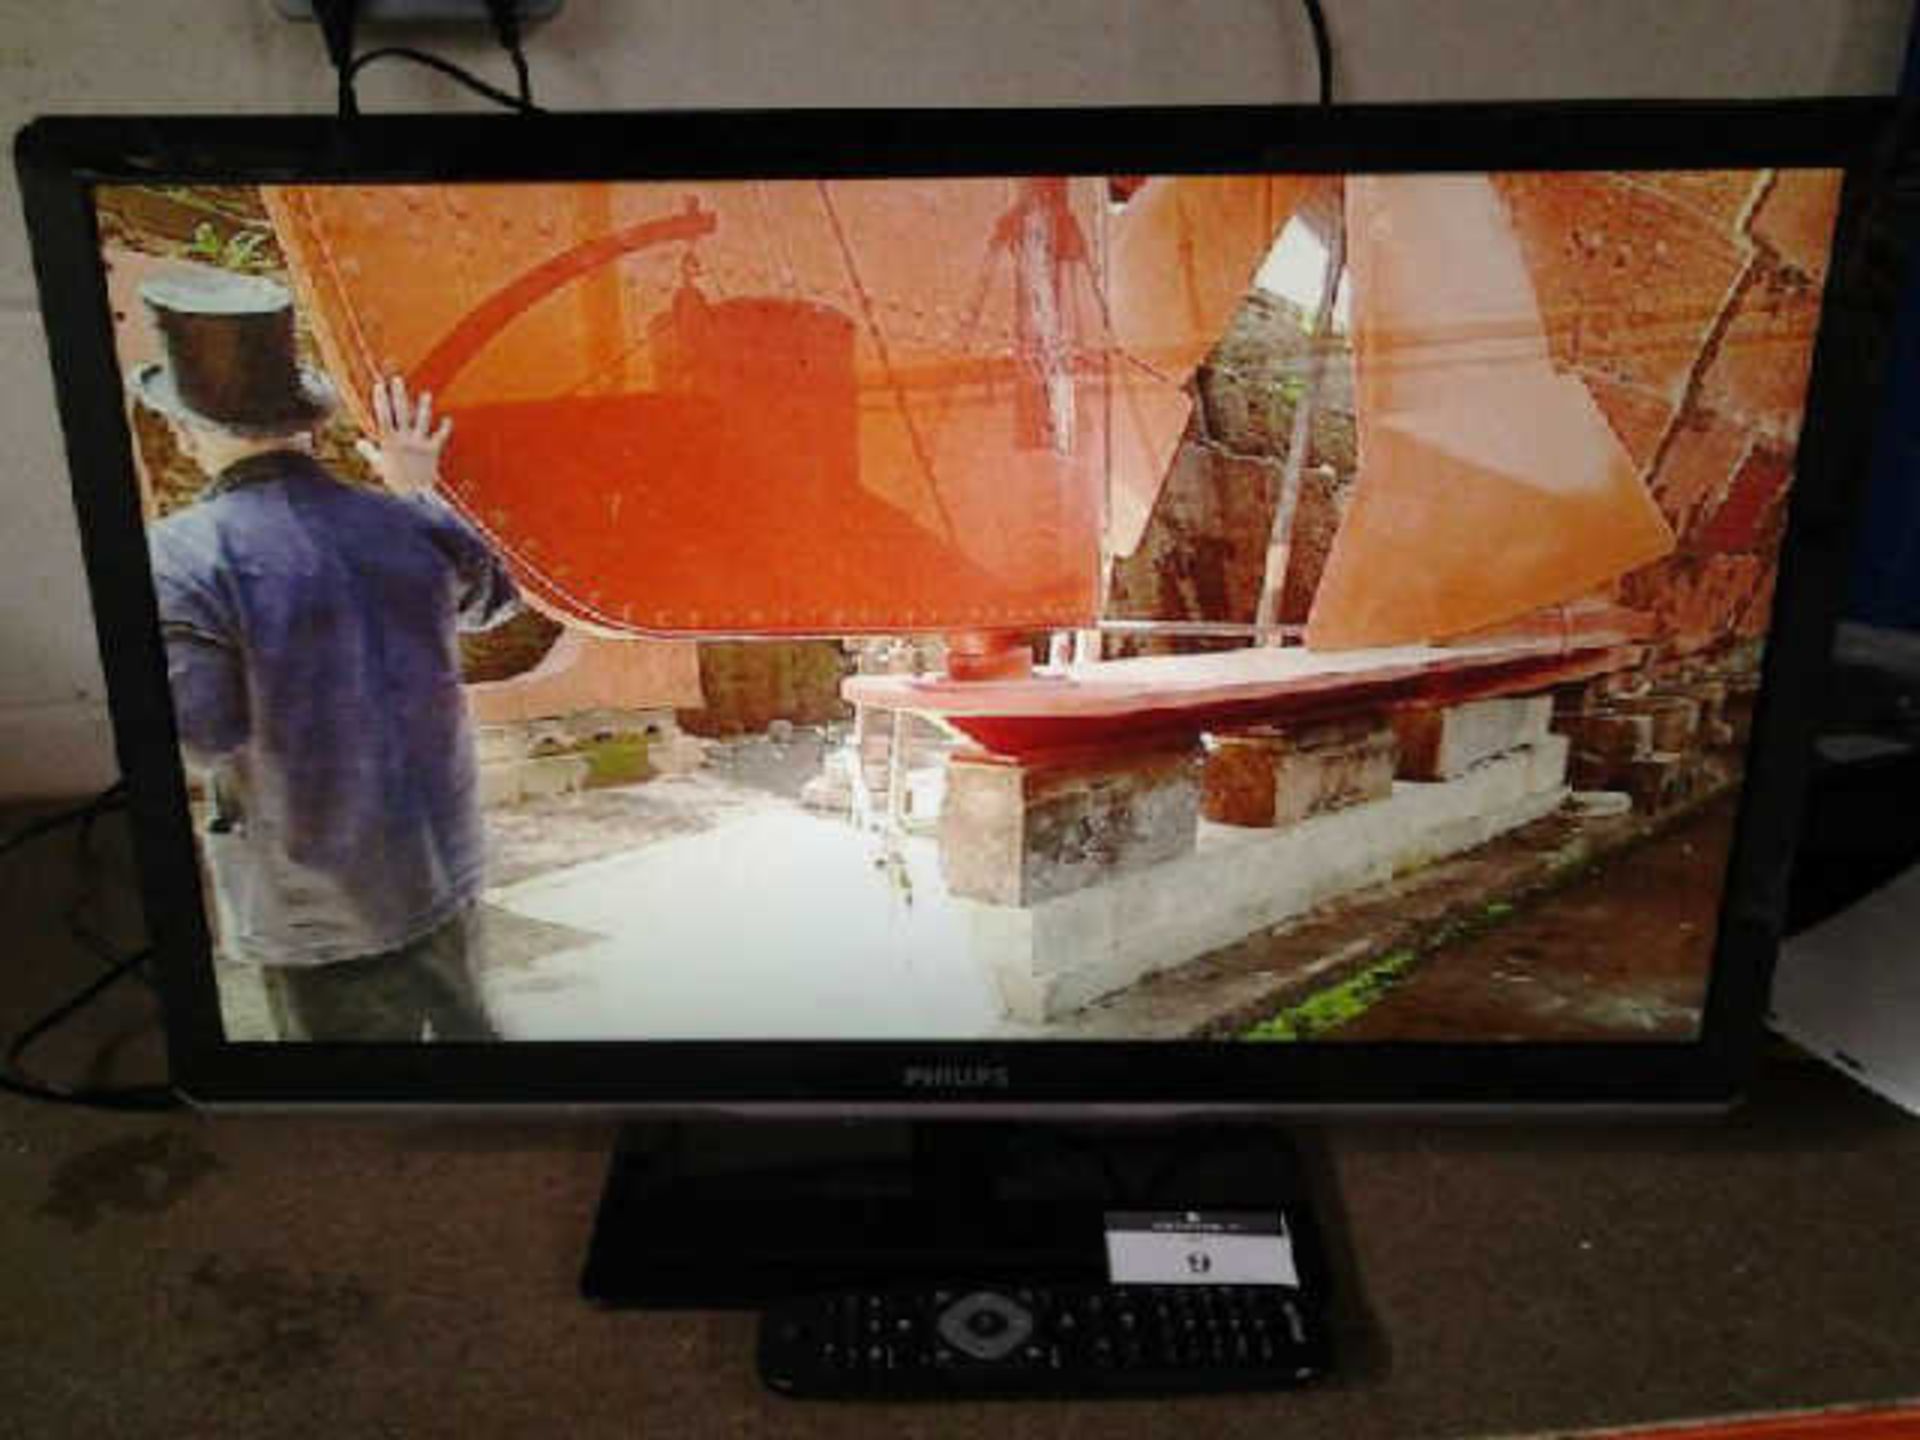 PHILIPS  24`` LED  SMART TELEVISION  MODEL  24PFL3507 INTERGRADED  FREEVIEW , WIRELESS  LAN READY